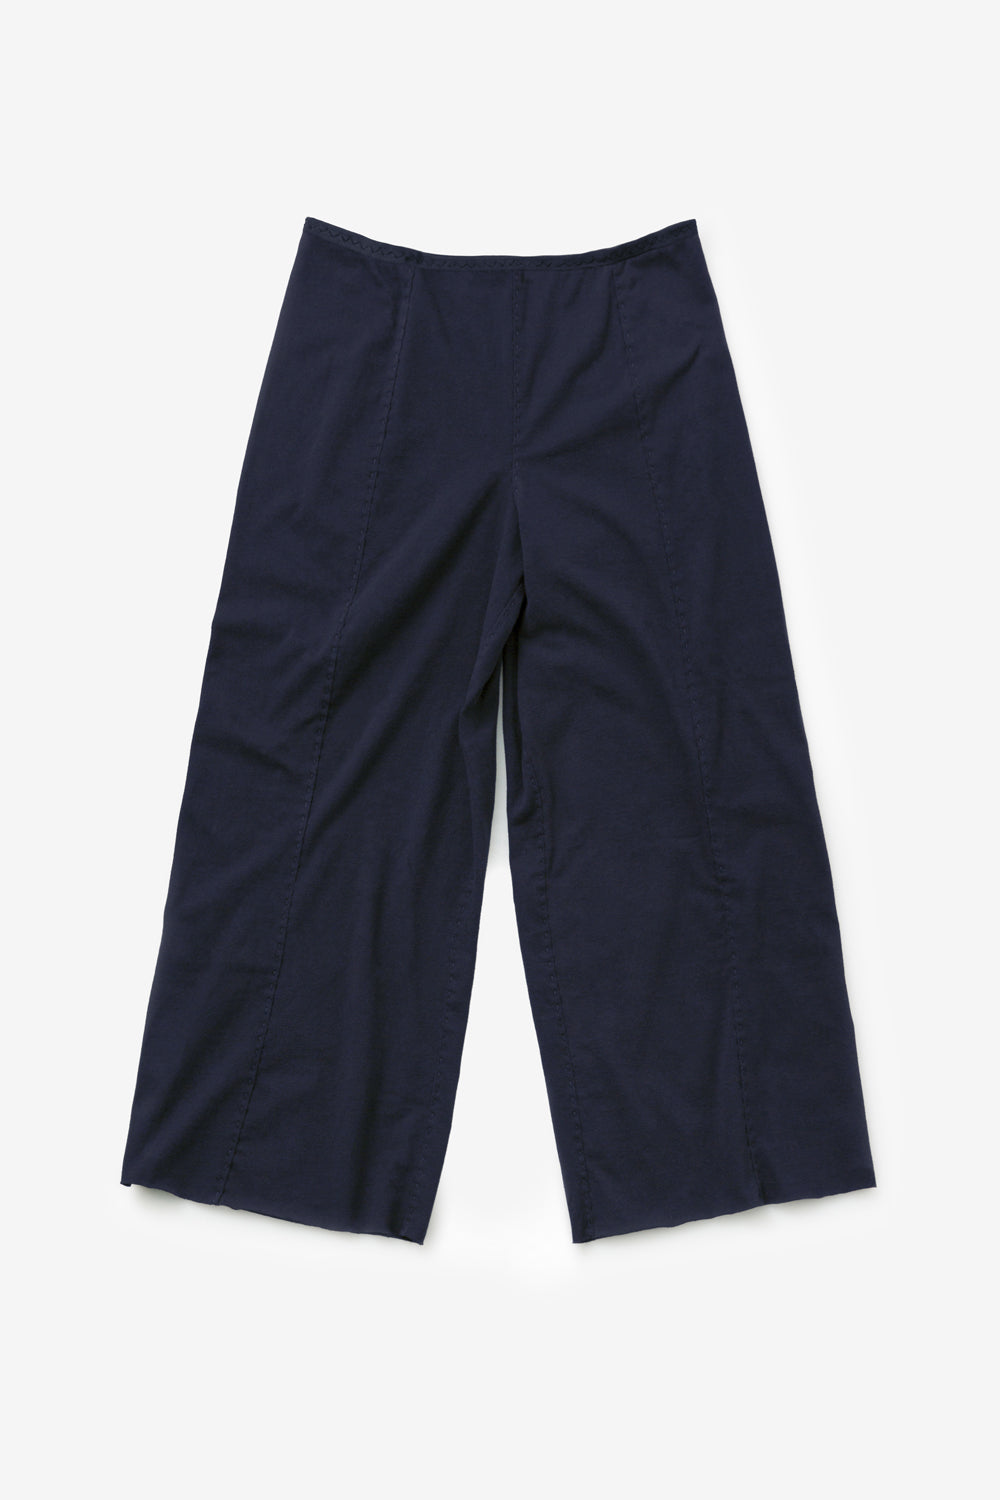 image of The Crop Pant Kit